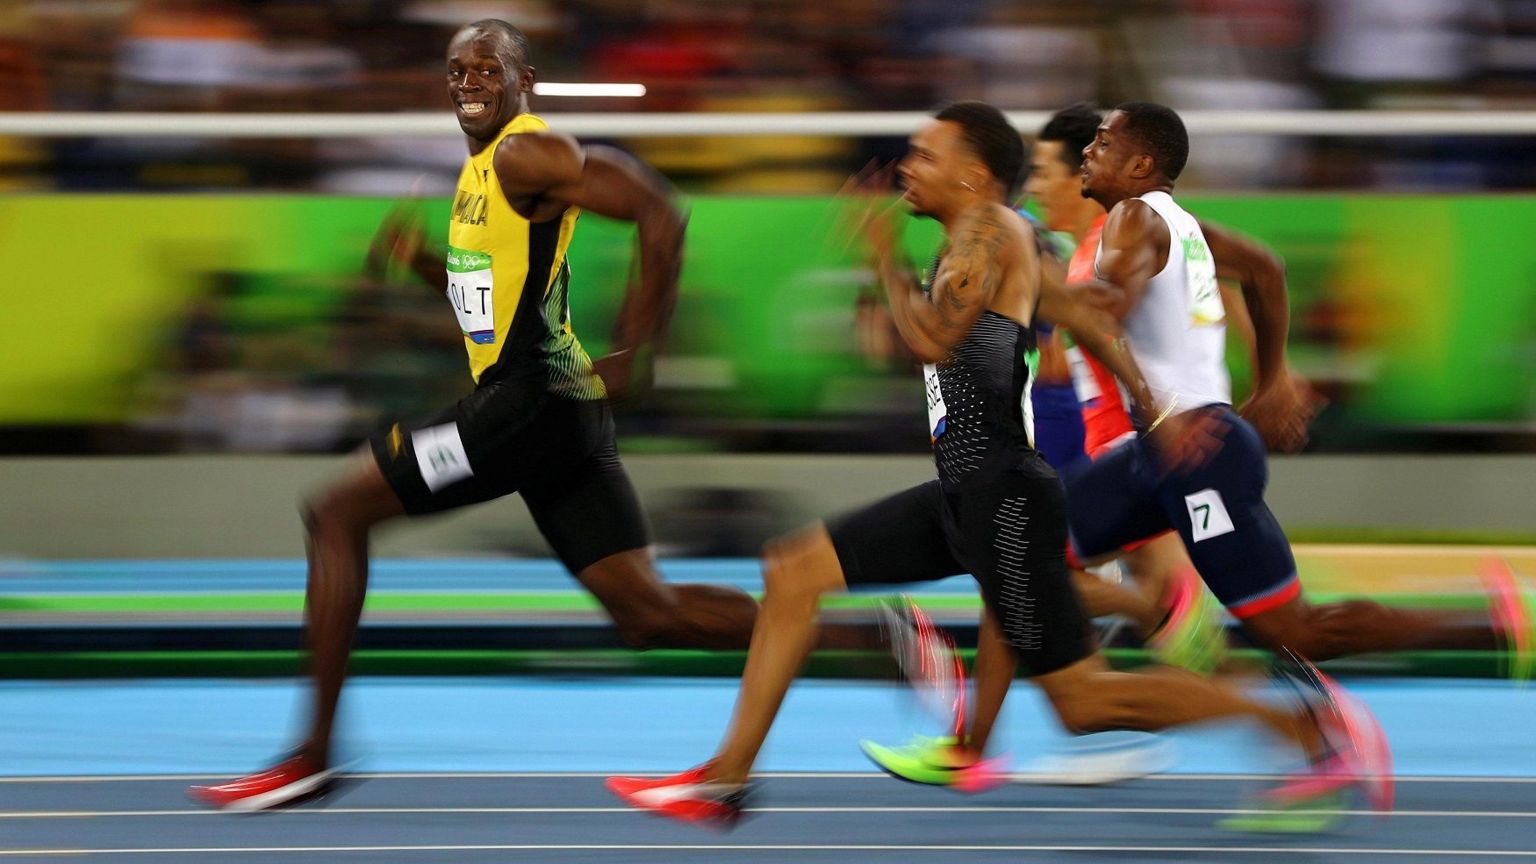 Usain Bolt running in a race with three athletes behind him